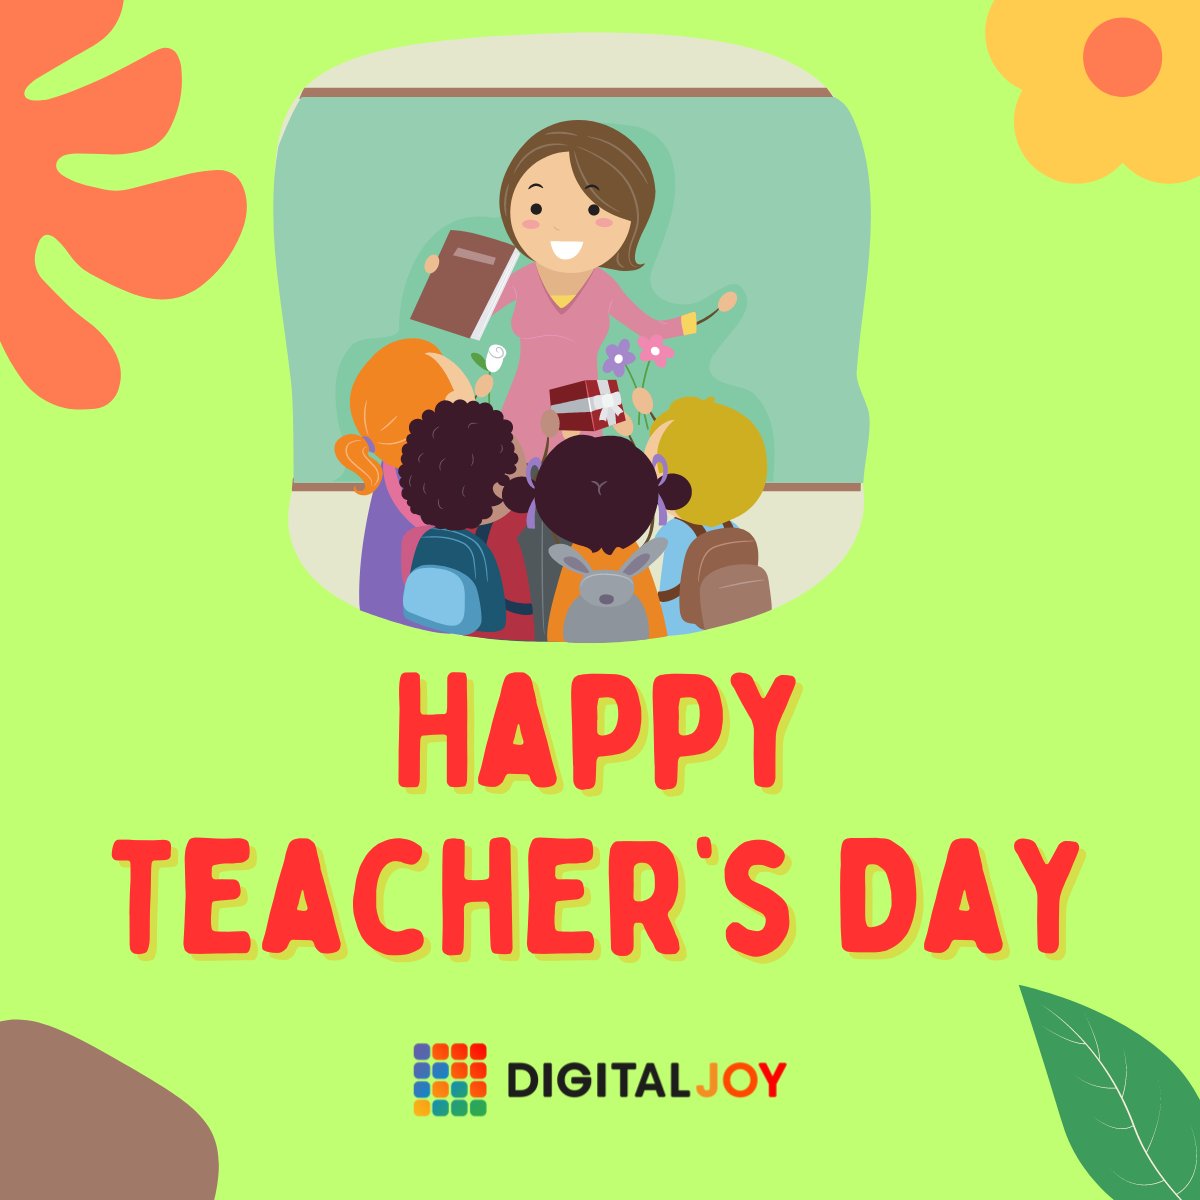 A big thank you to all the teachers who inspire, challenge, and care for our students every day! 🍎 

Your dedication shapes the future.

#NationalTeacherDay #ThankYouTeachers